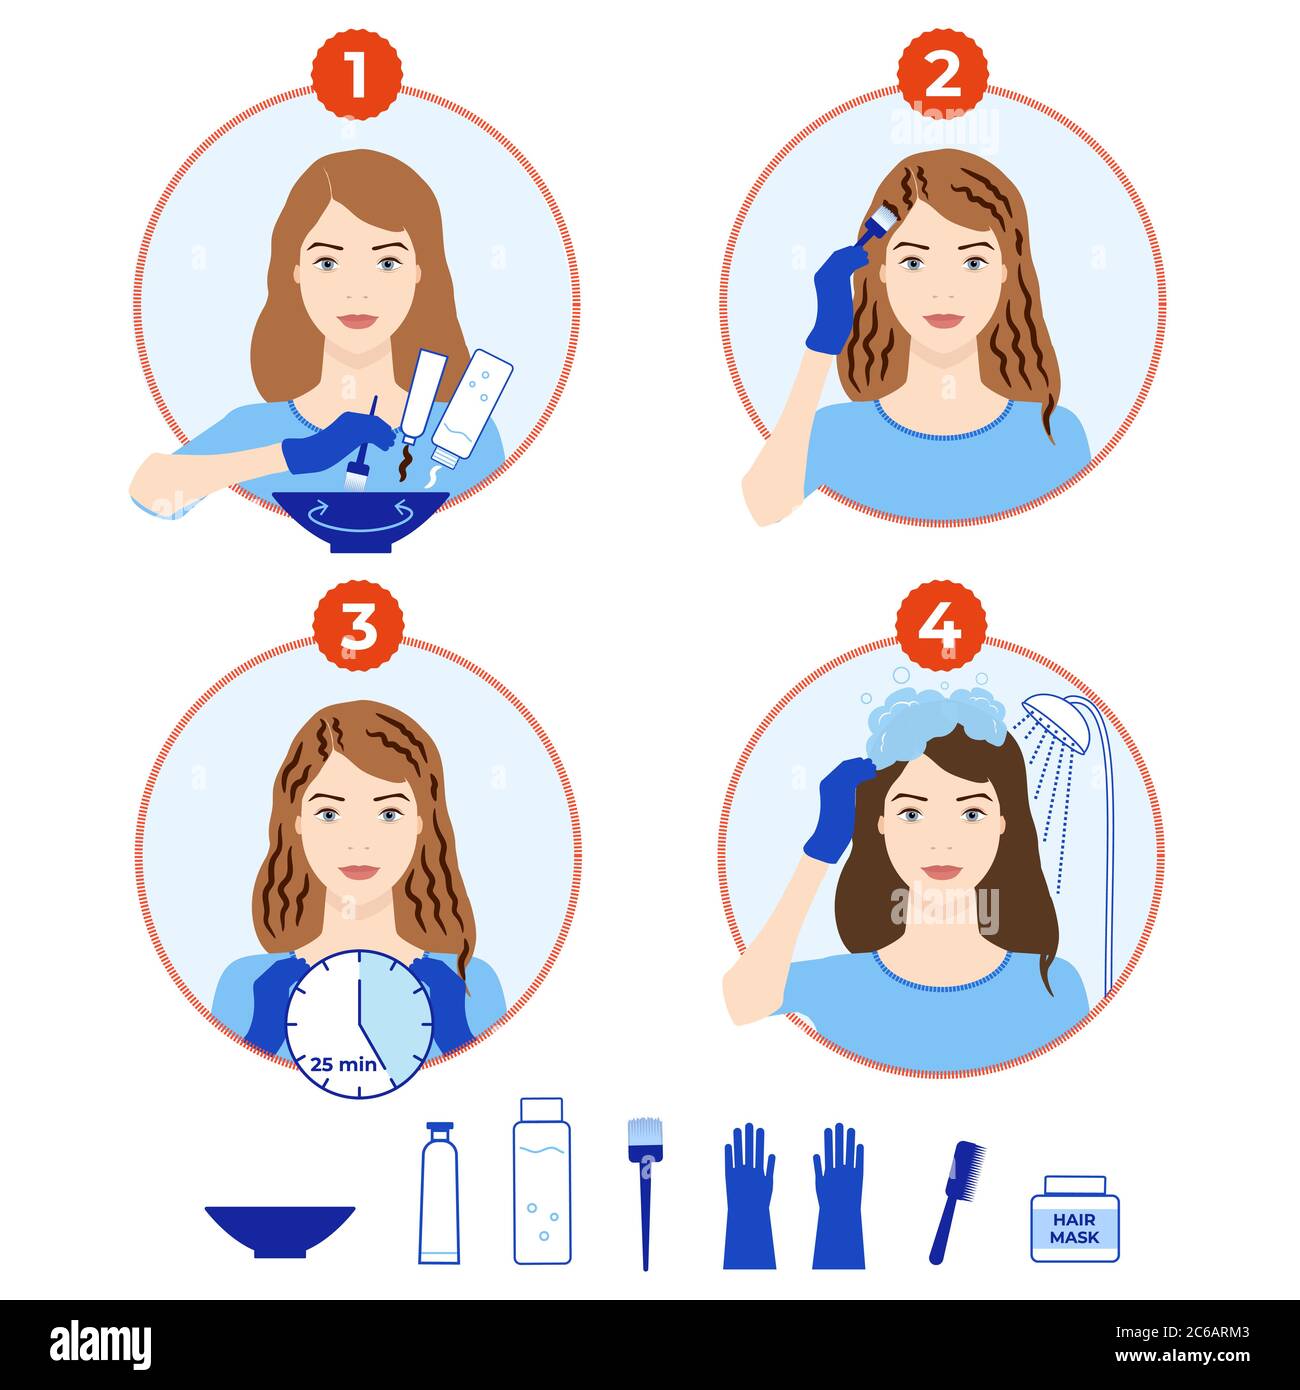 Hair dyeing icons set. How to dye hair at home tutorial. Stock Vector